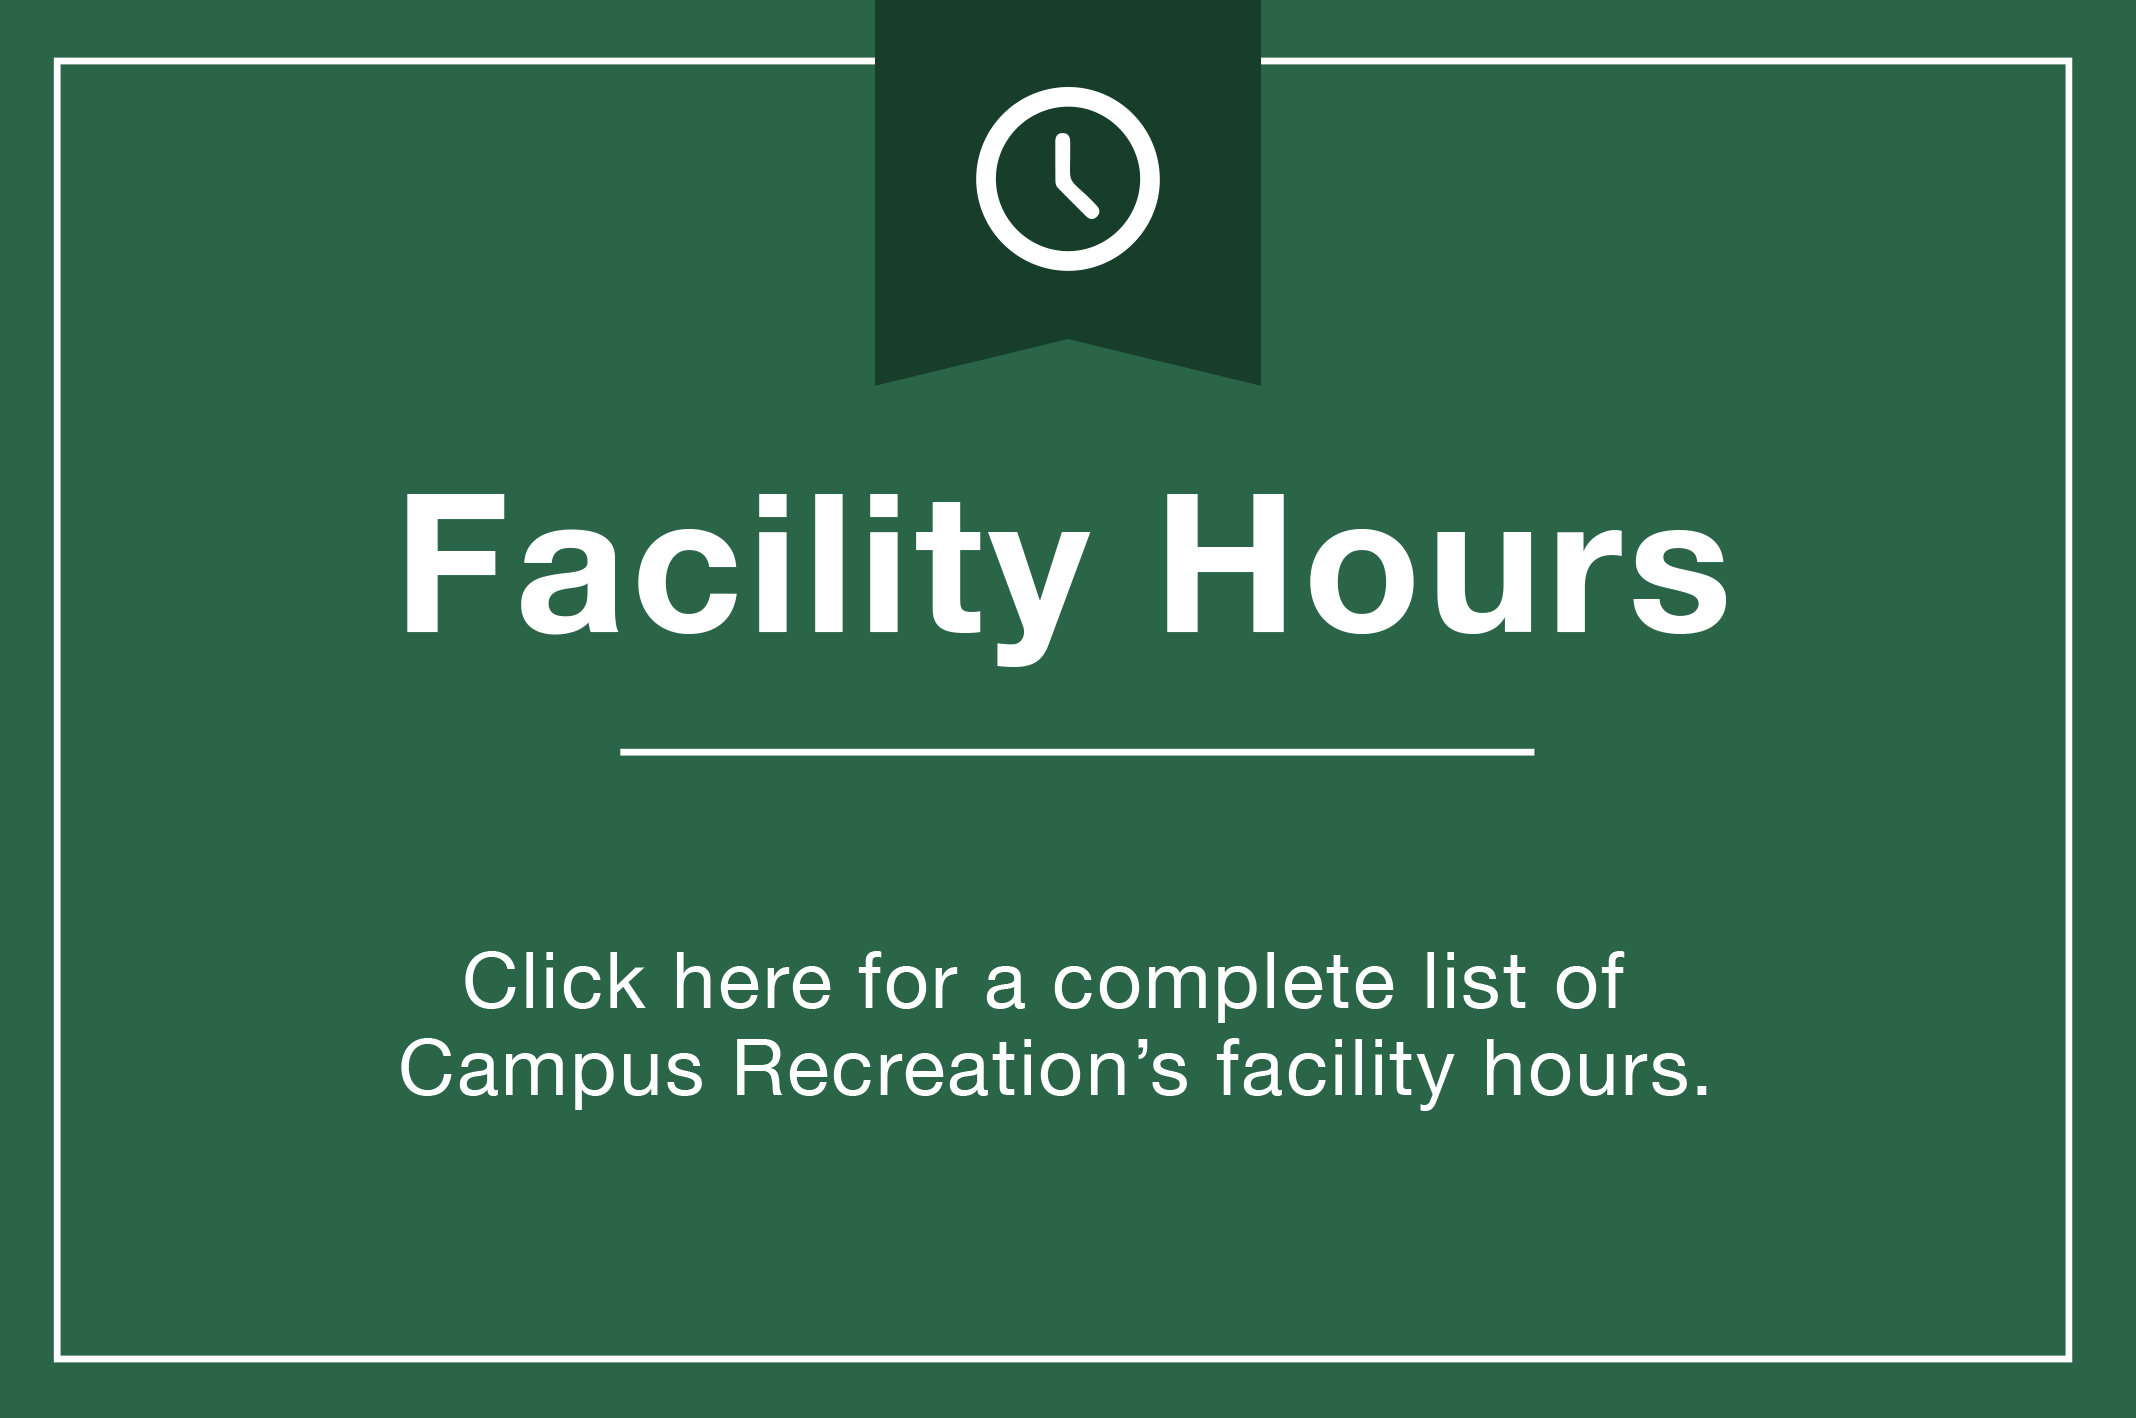 FACILITIES hours graphic